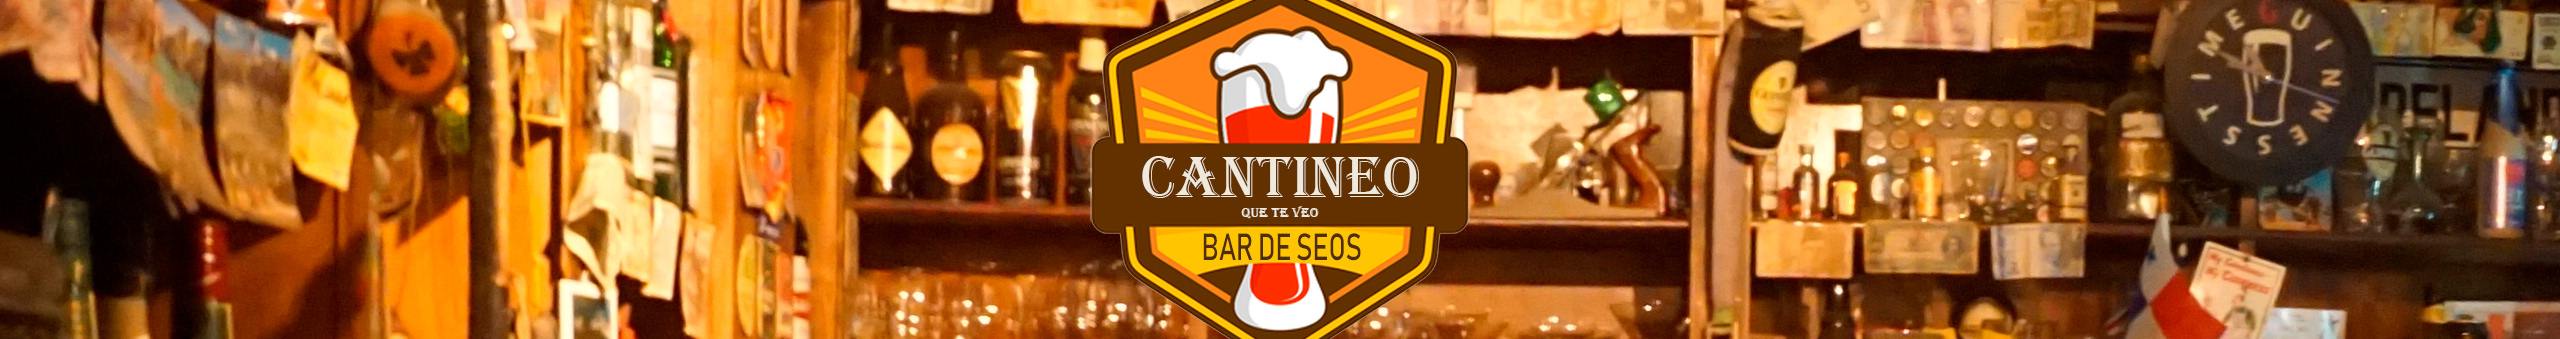 Cantineoqueteveo Madrid's profile banner